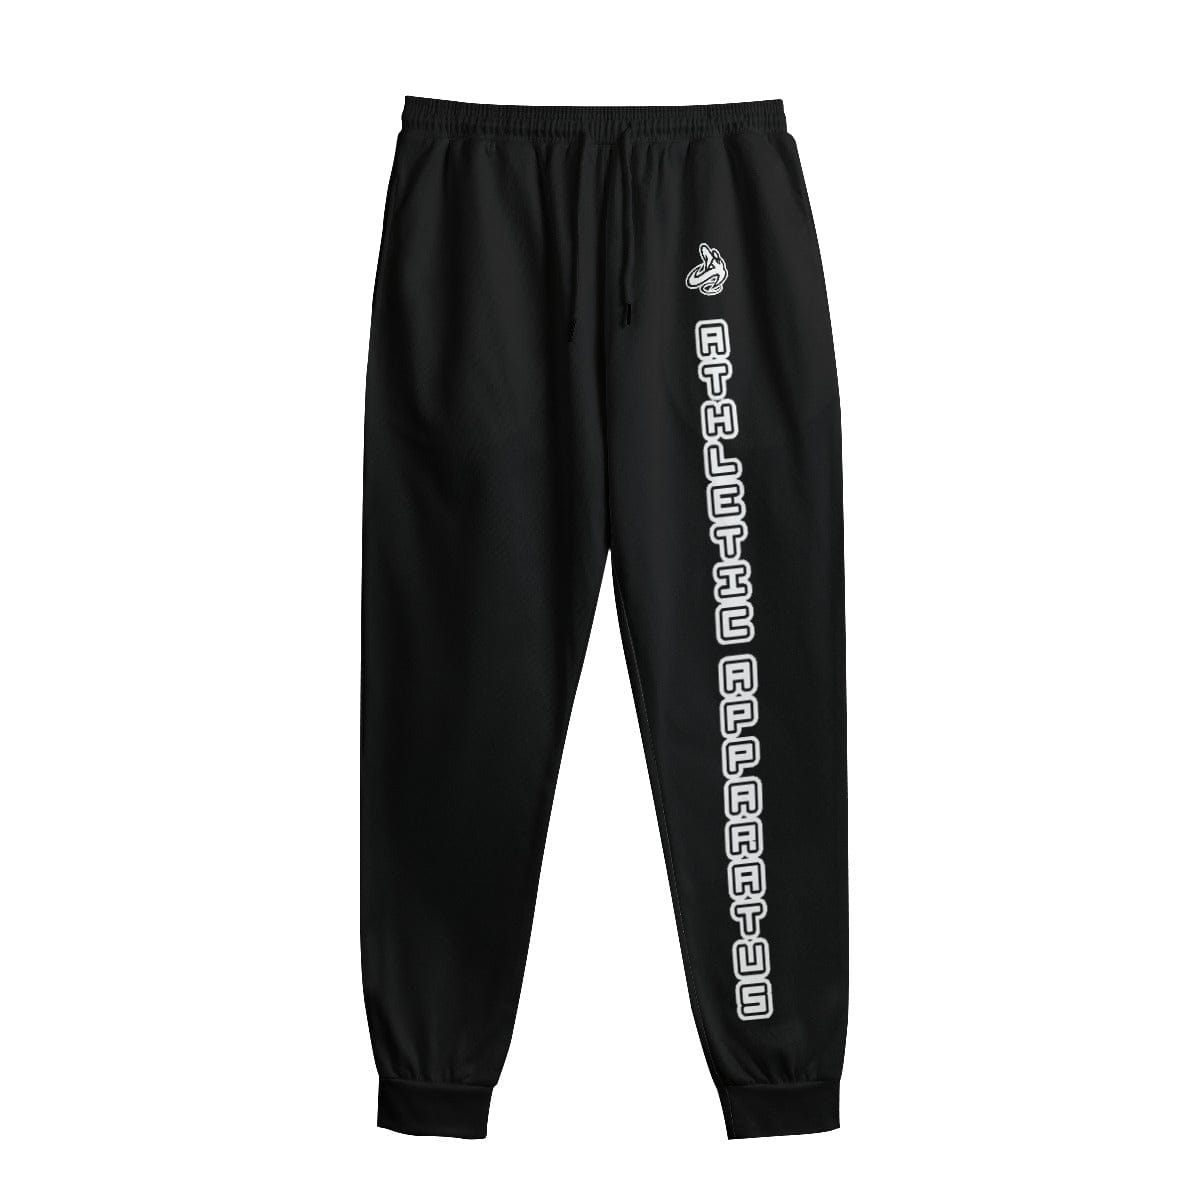 Athletic Apparatus Black Men's Sweatpants With Waistband